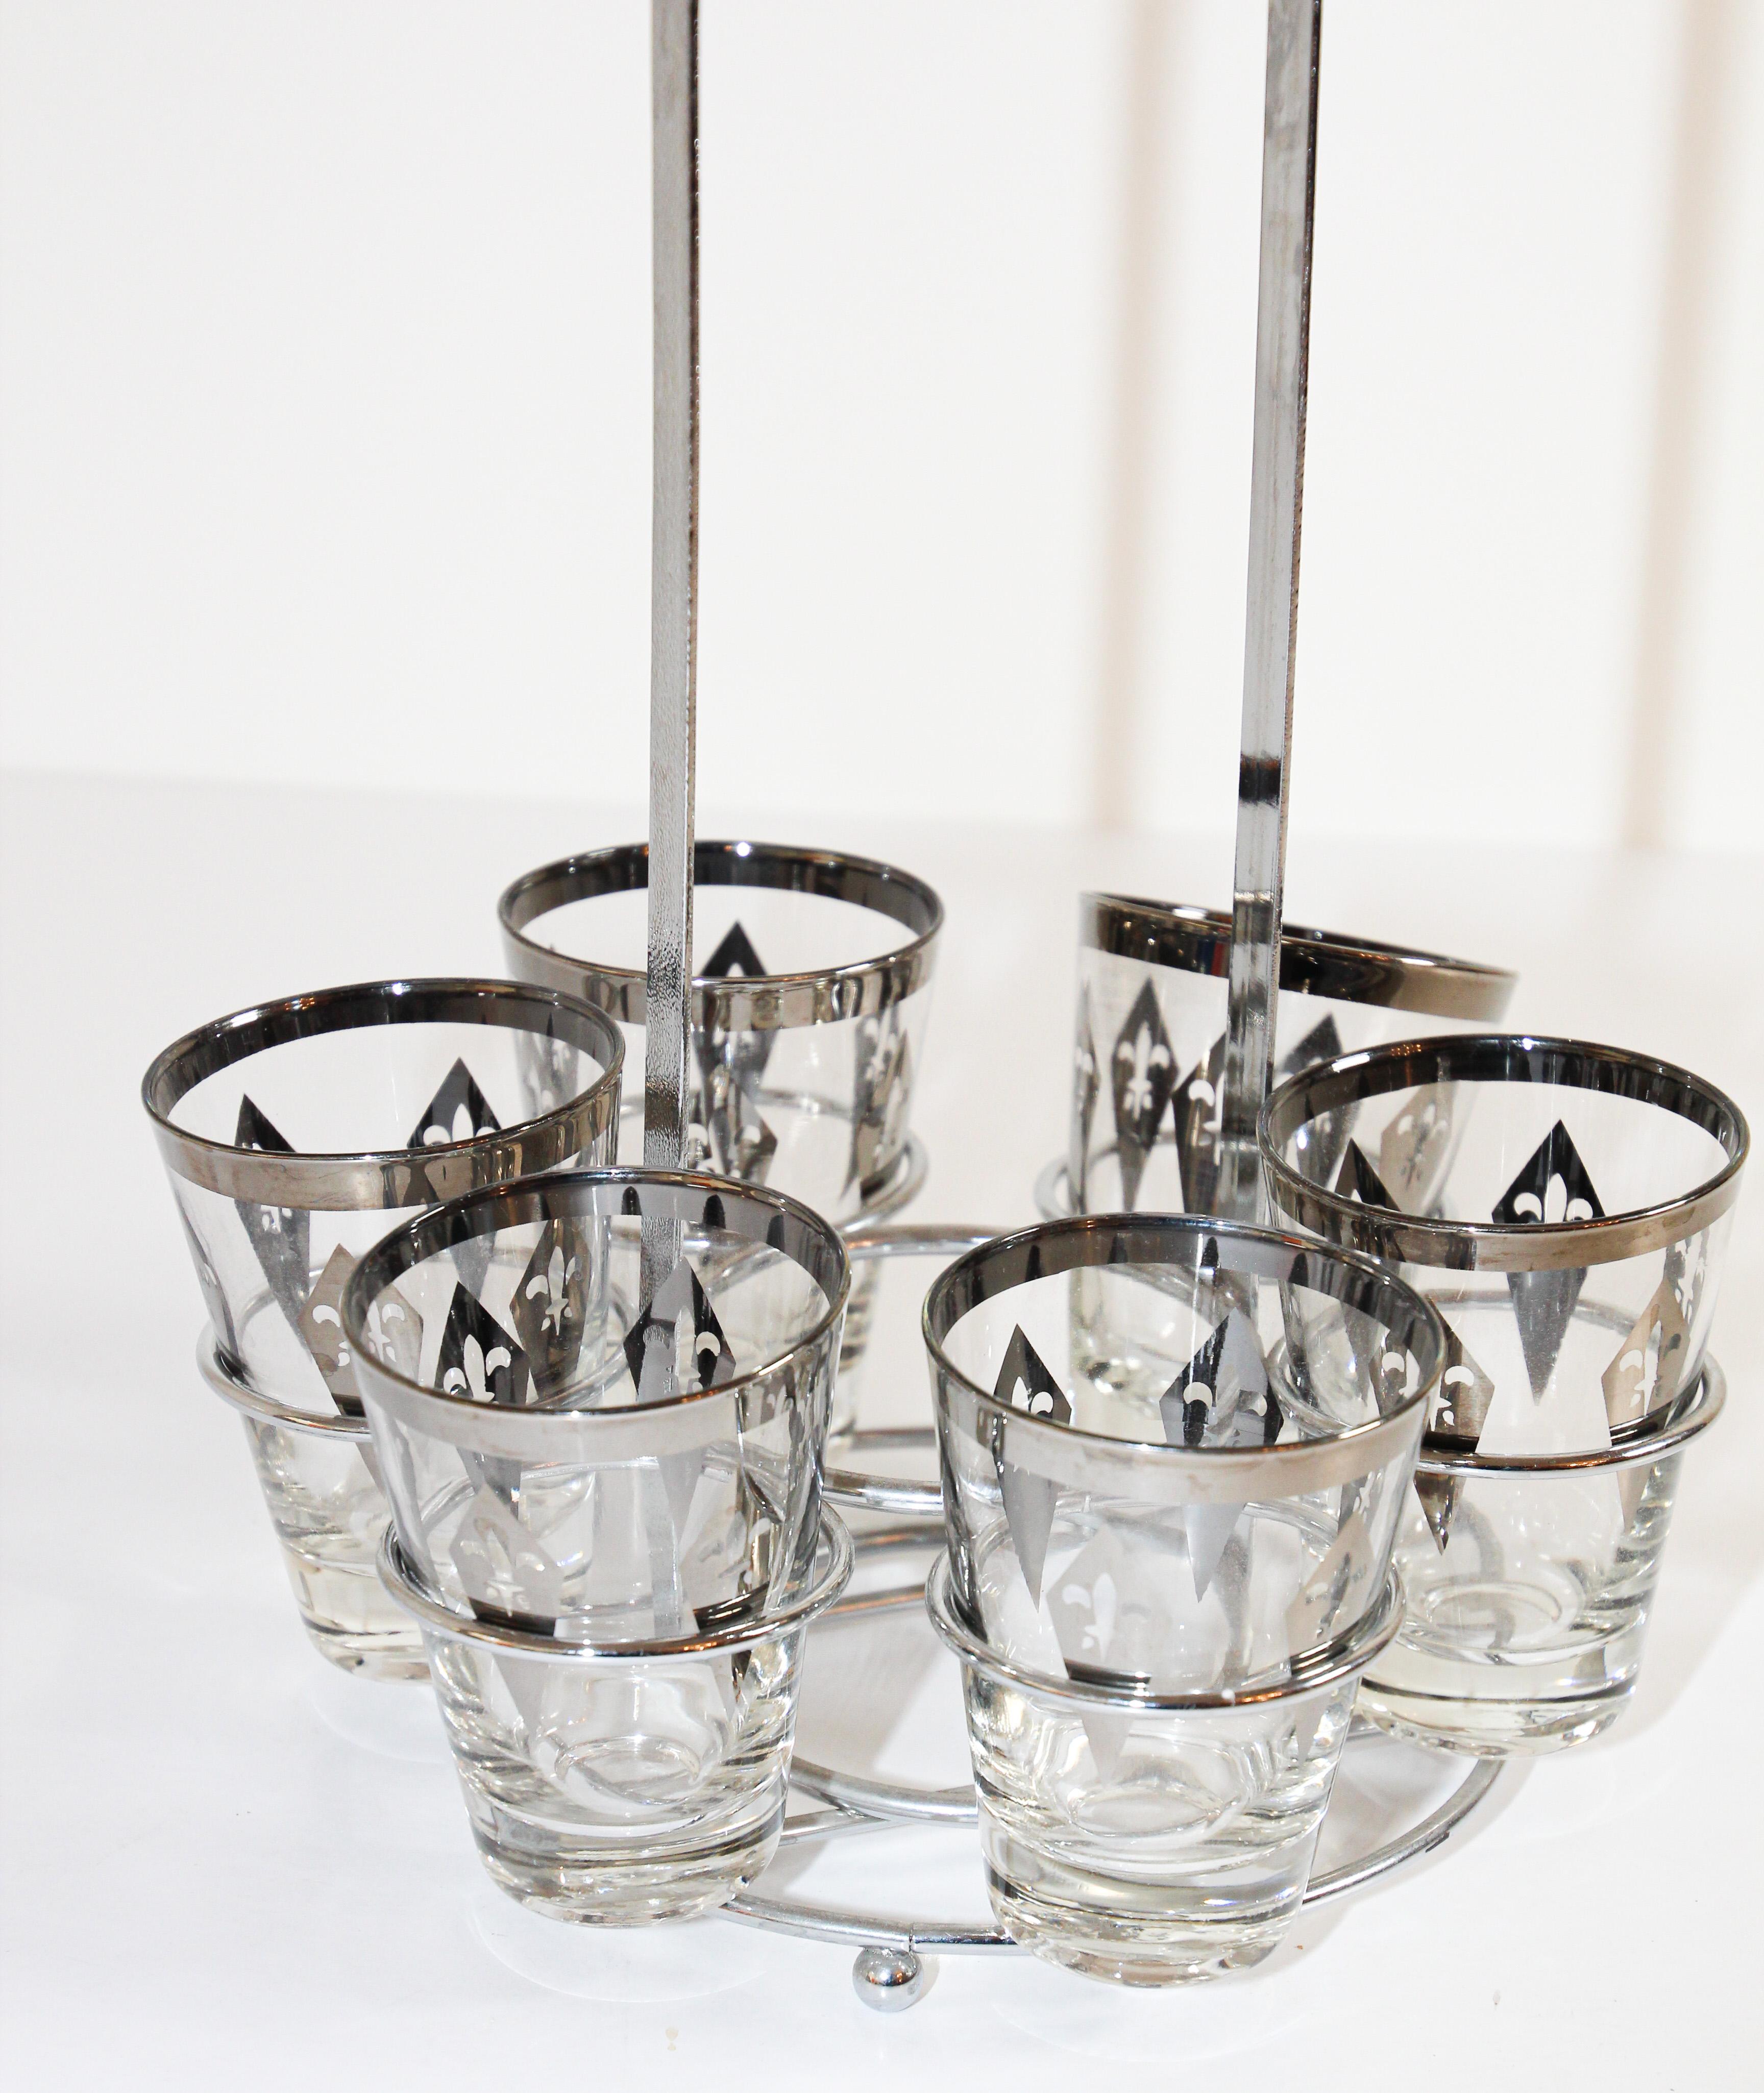 Vintage Barware Set of Six Glasses with Silver Overlay in Carrier Caddy 9